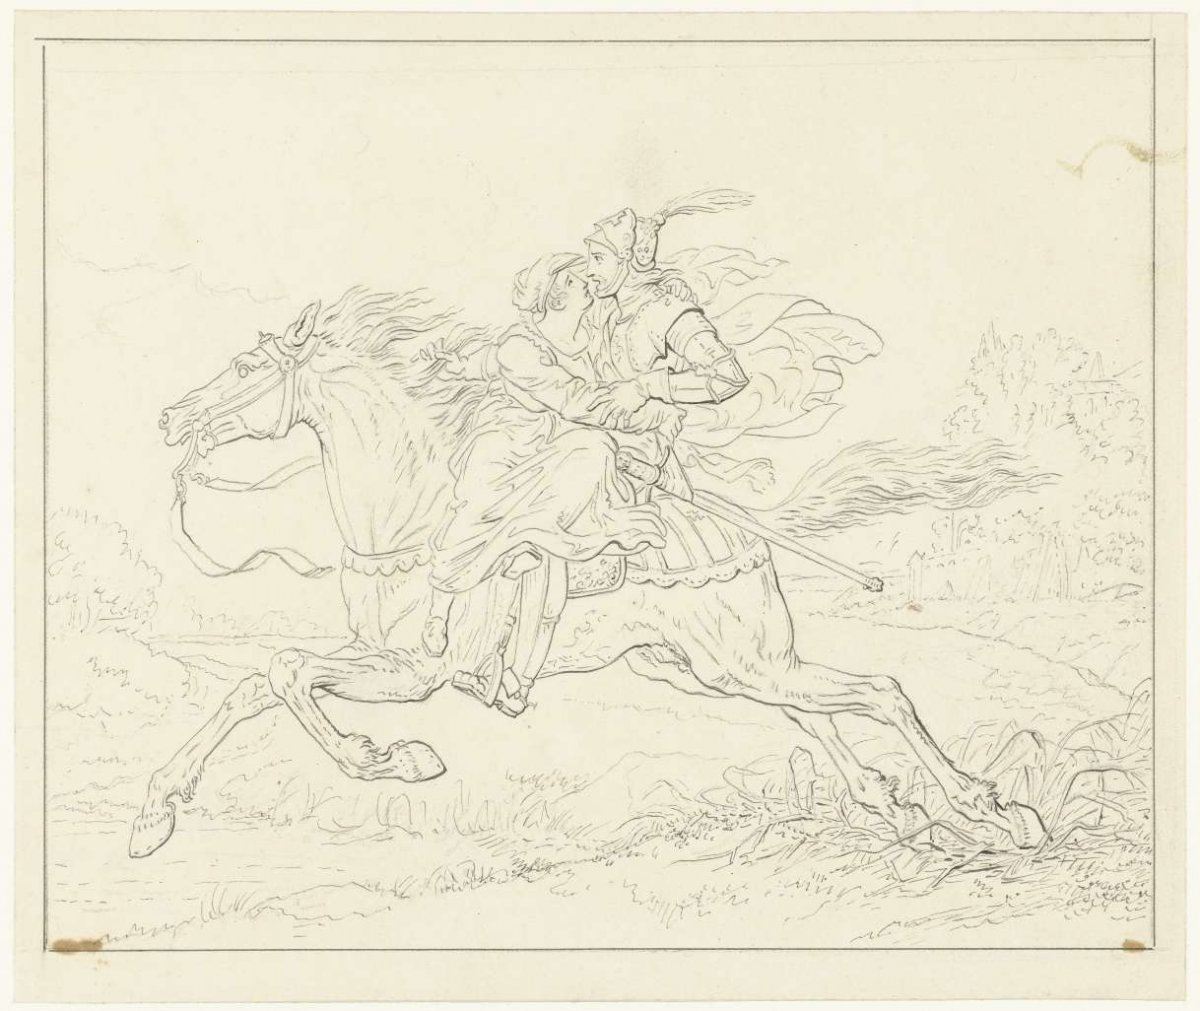 Knight with a woman on horseback, Louis Moritz, 1783 - 1850